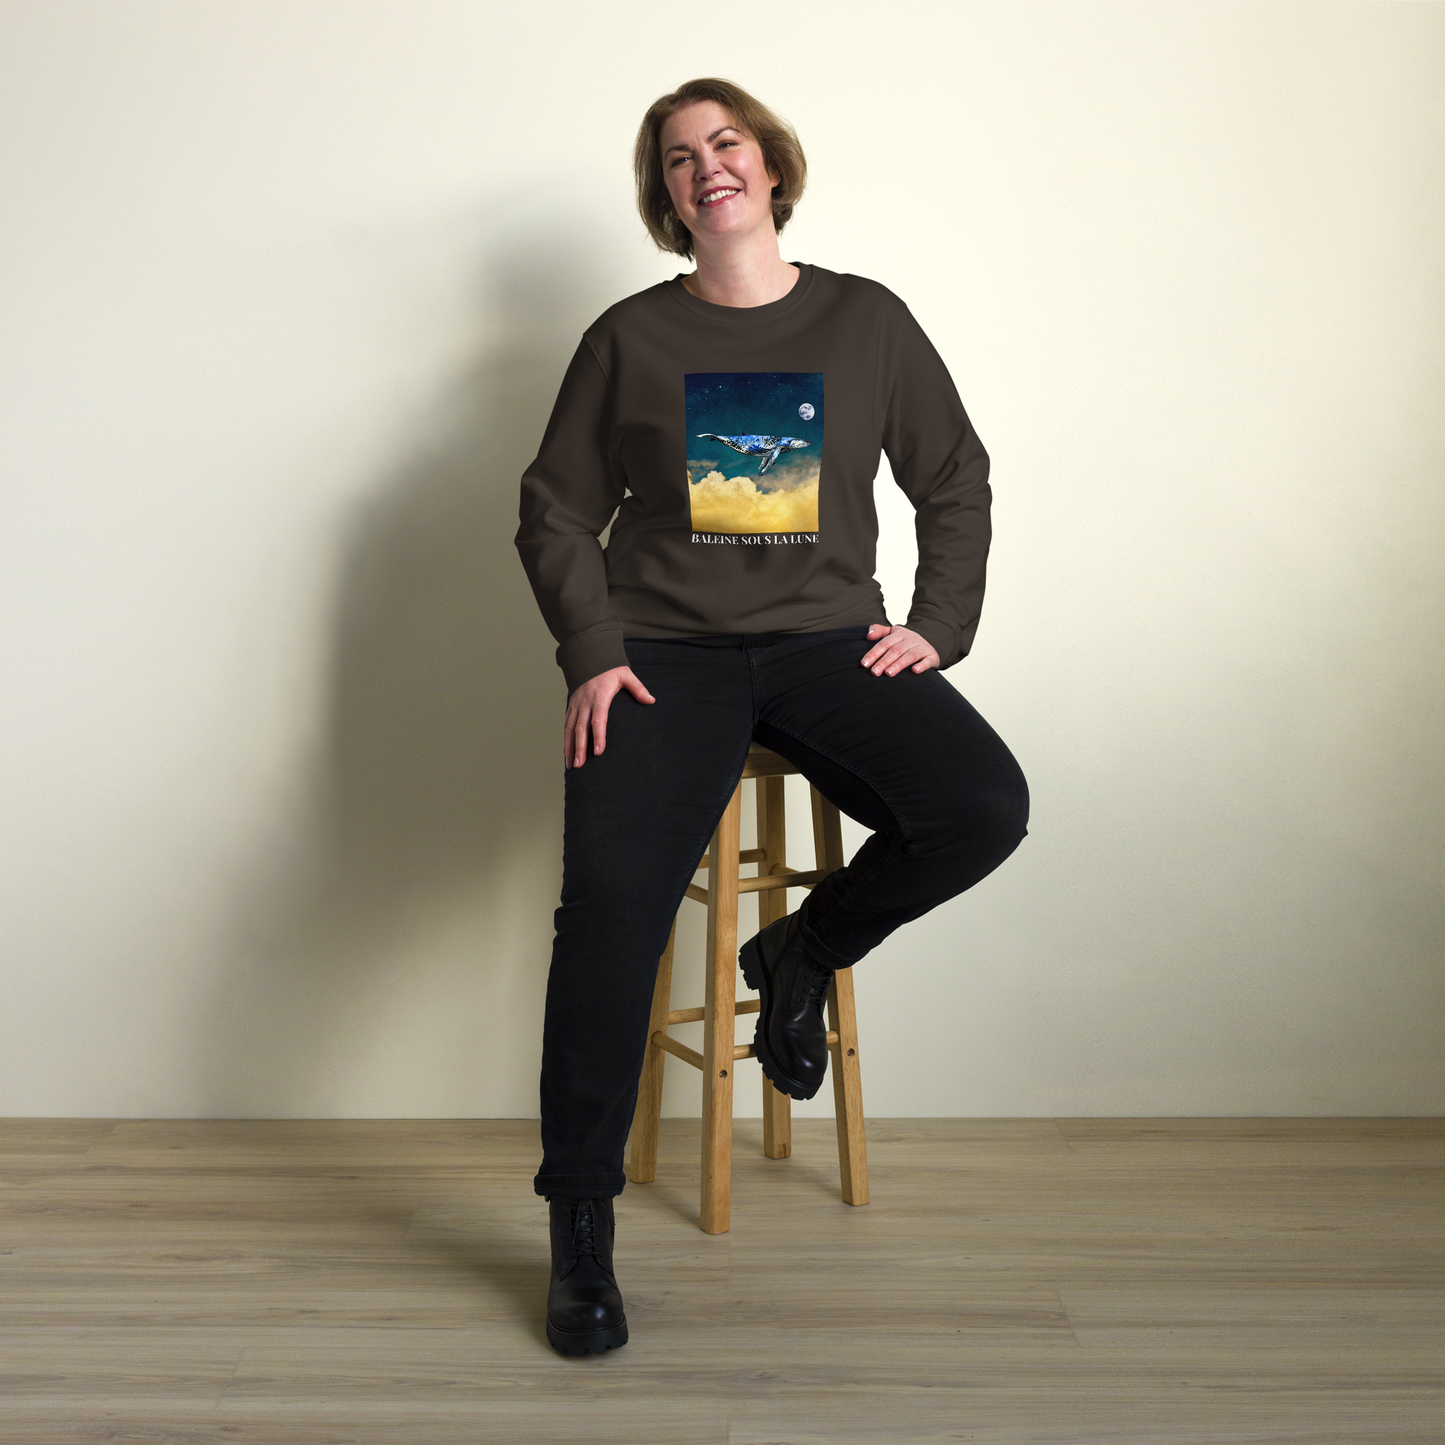 Smiling woman wearing a Deep Charcoal Grey Organic Cotton Whale Sweatshirt showcasing an enchanting Whale Under The Moon graphic on the chest - Cool Whale Graphic Sweatshirts - Boozy Fox